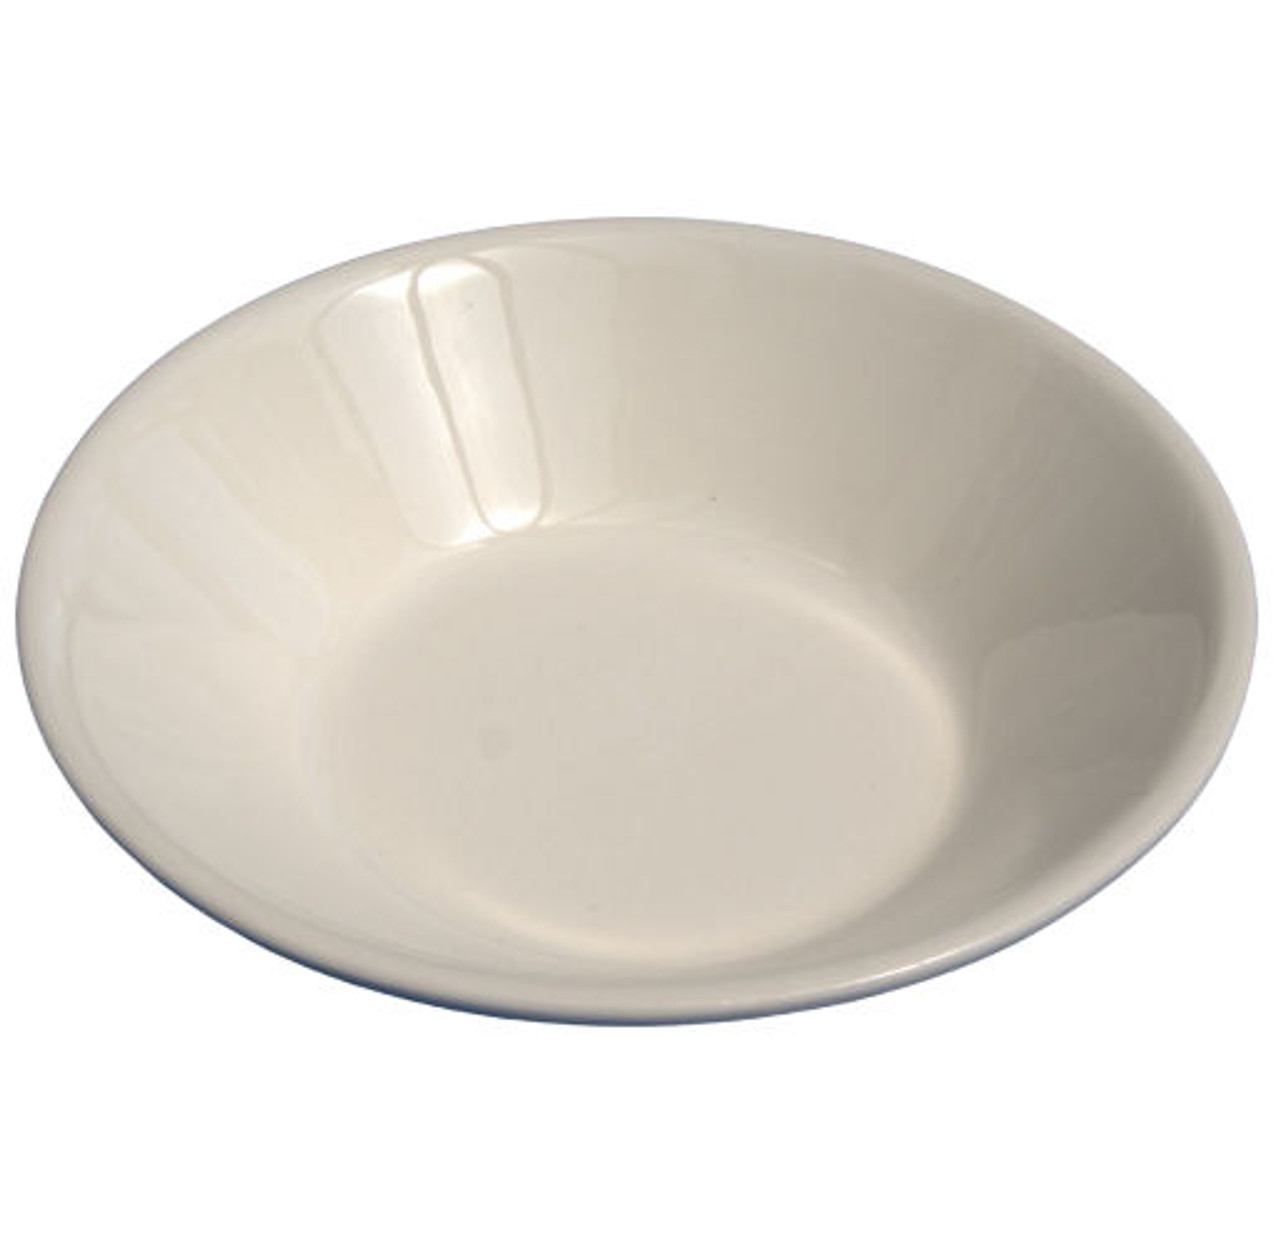 Dudson Classic White 47/8"   (12.4cm) Fruit Bowl Each  Clearance Price